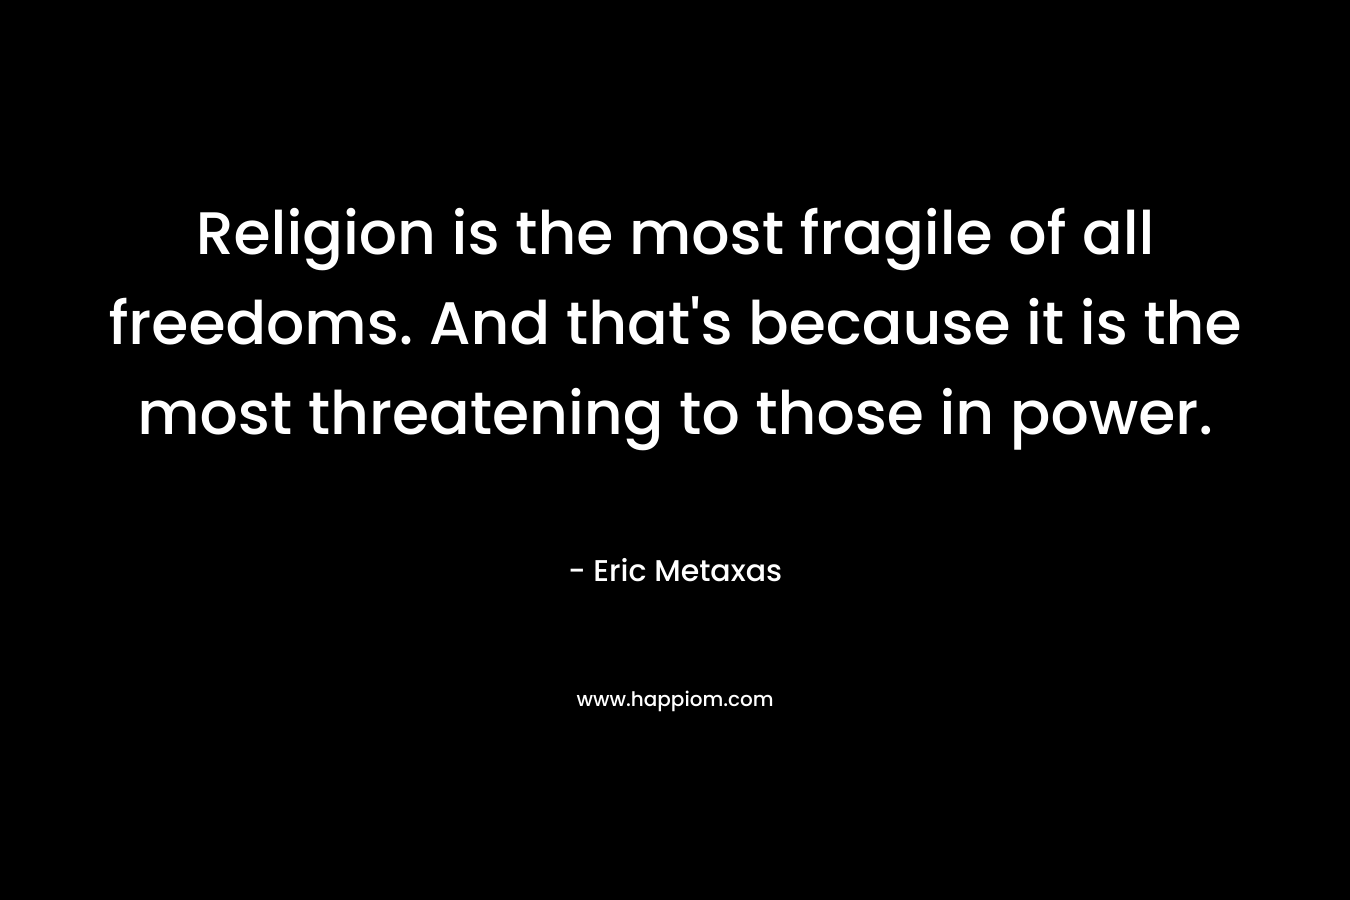 Religion is the most fragile of all freedoms. And that’s because it is the most threatening to those in power. – Eric Metaxas